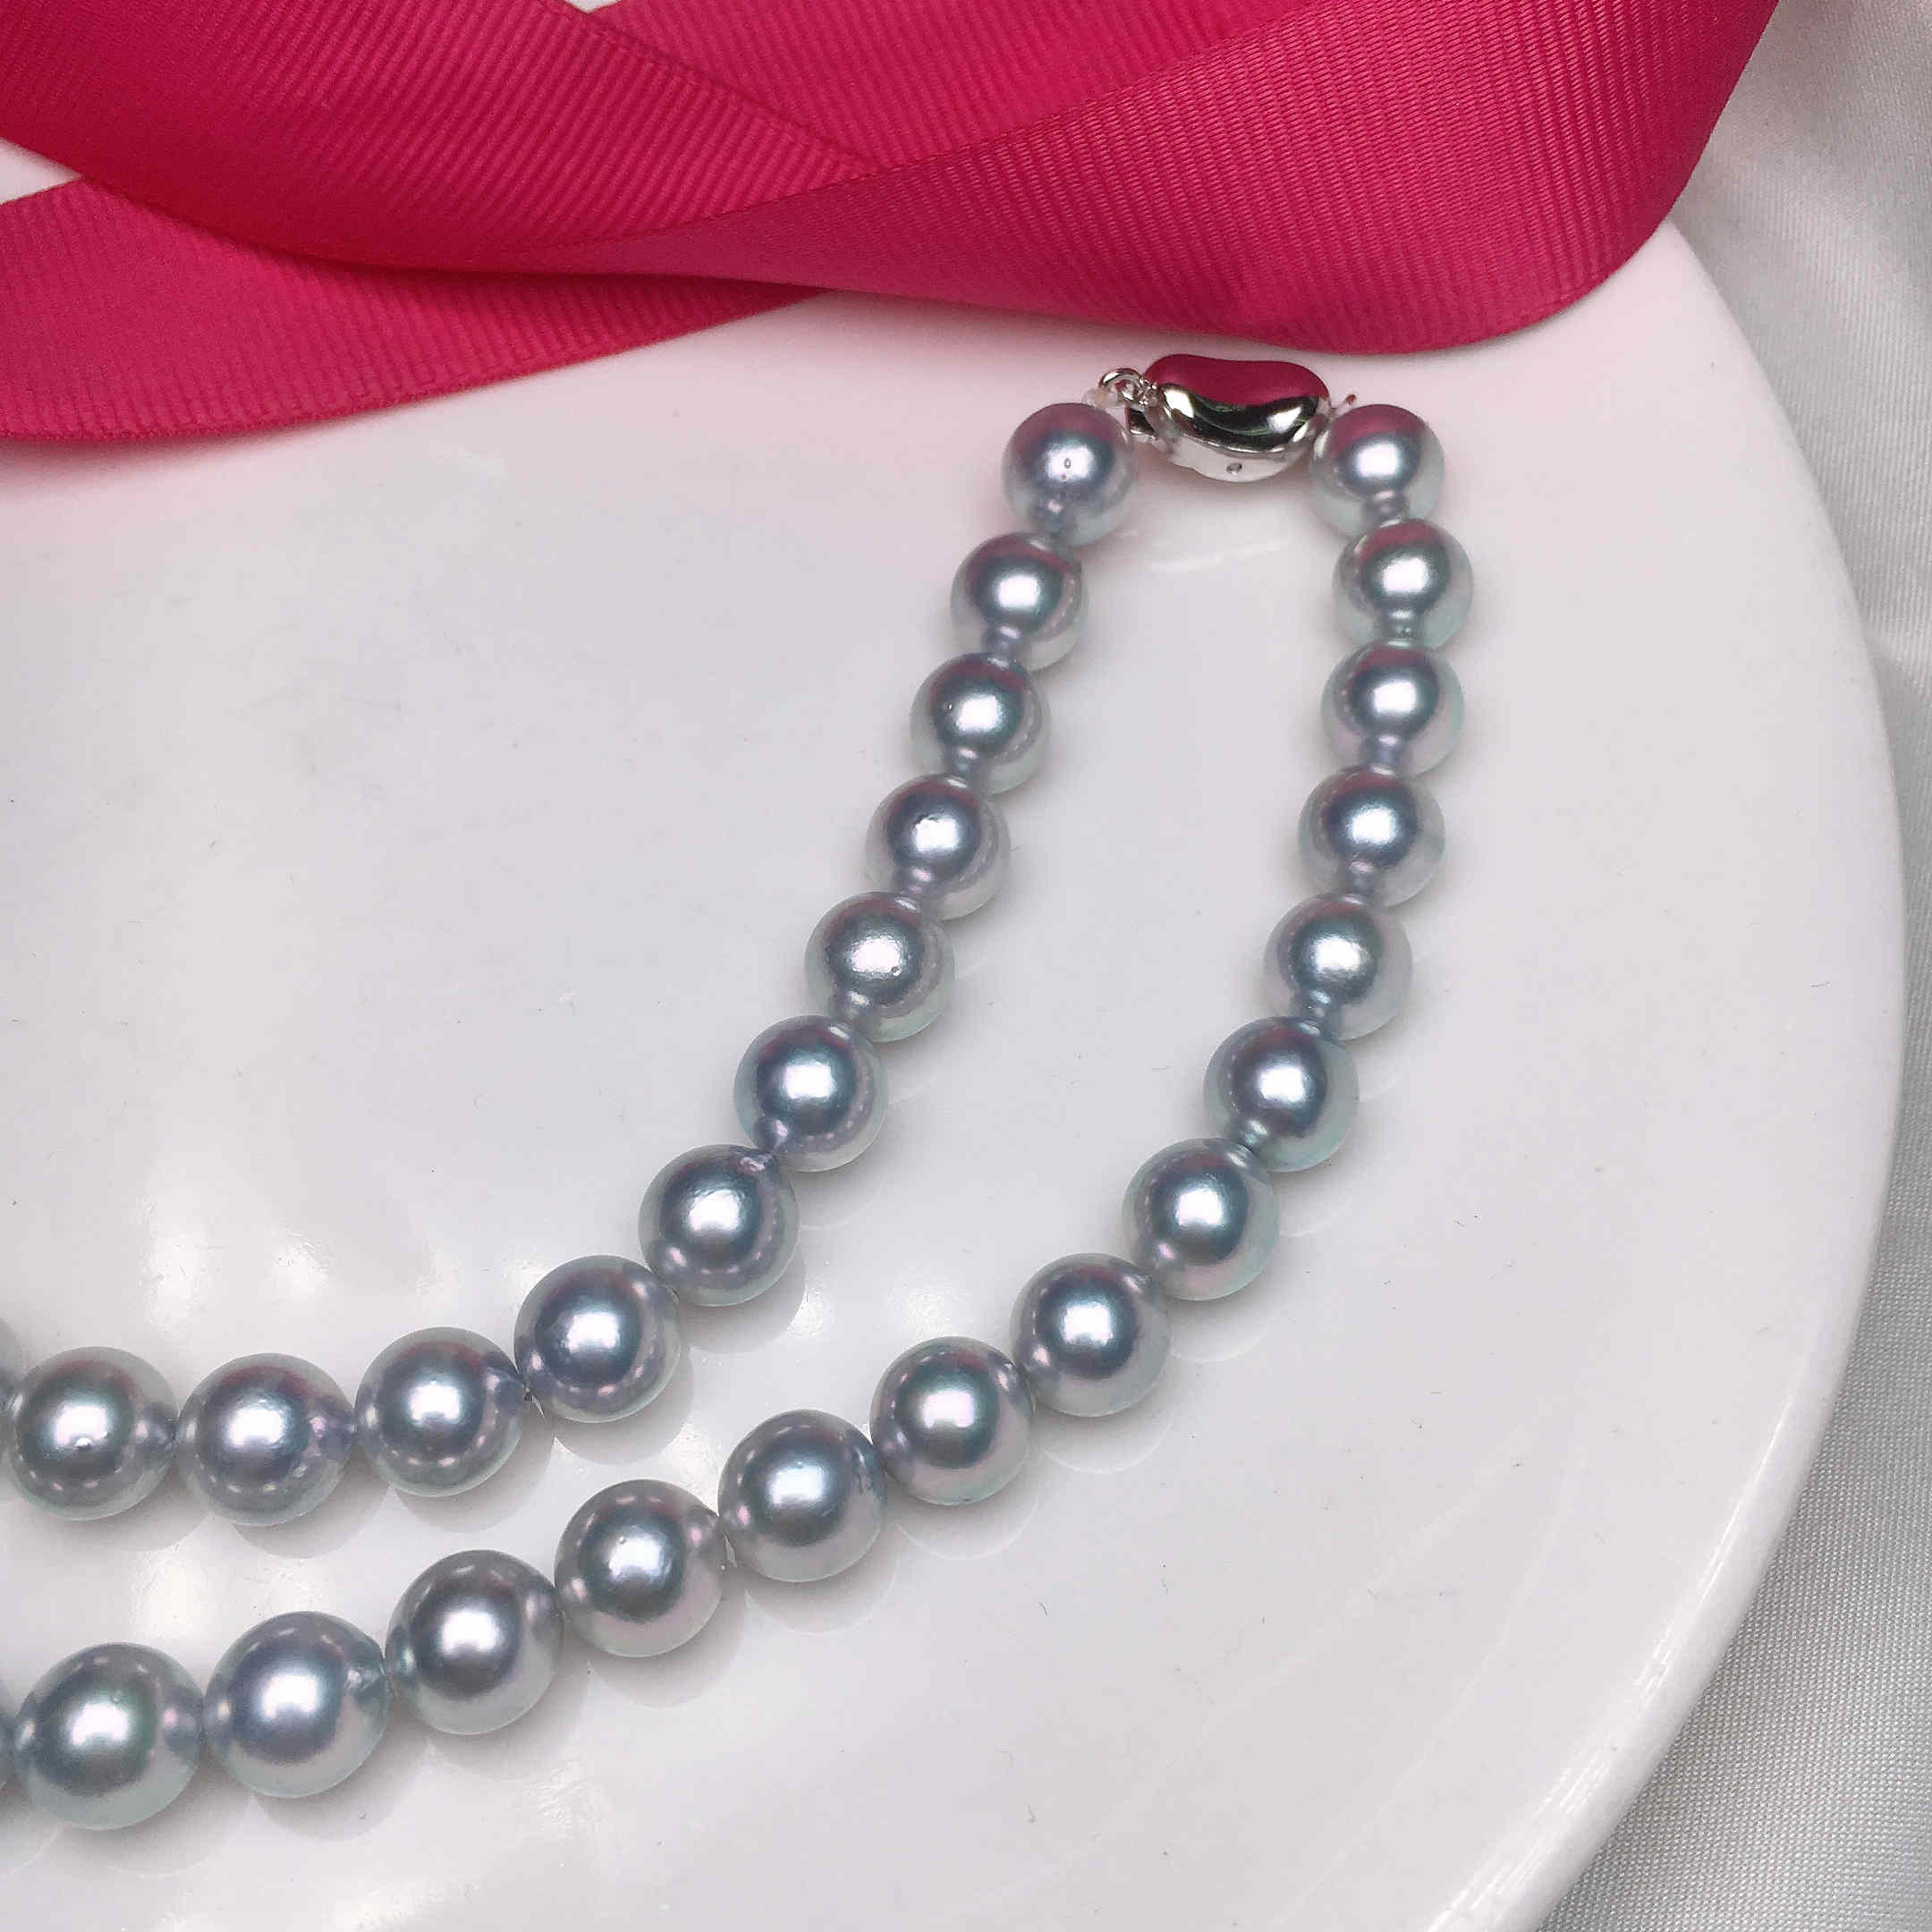 8.0-8.5 mm Silver-Blue Japanese Akoya Pearl Necklace 16" for Woman - takaramonobr